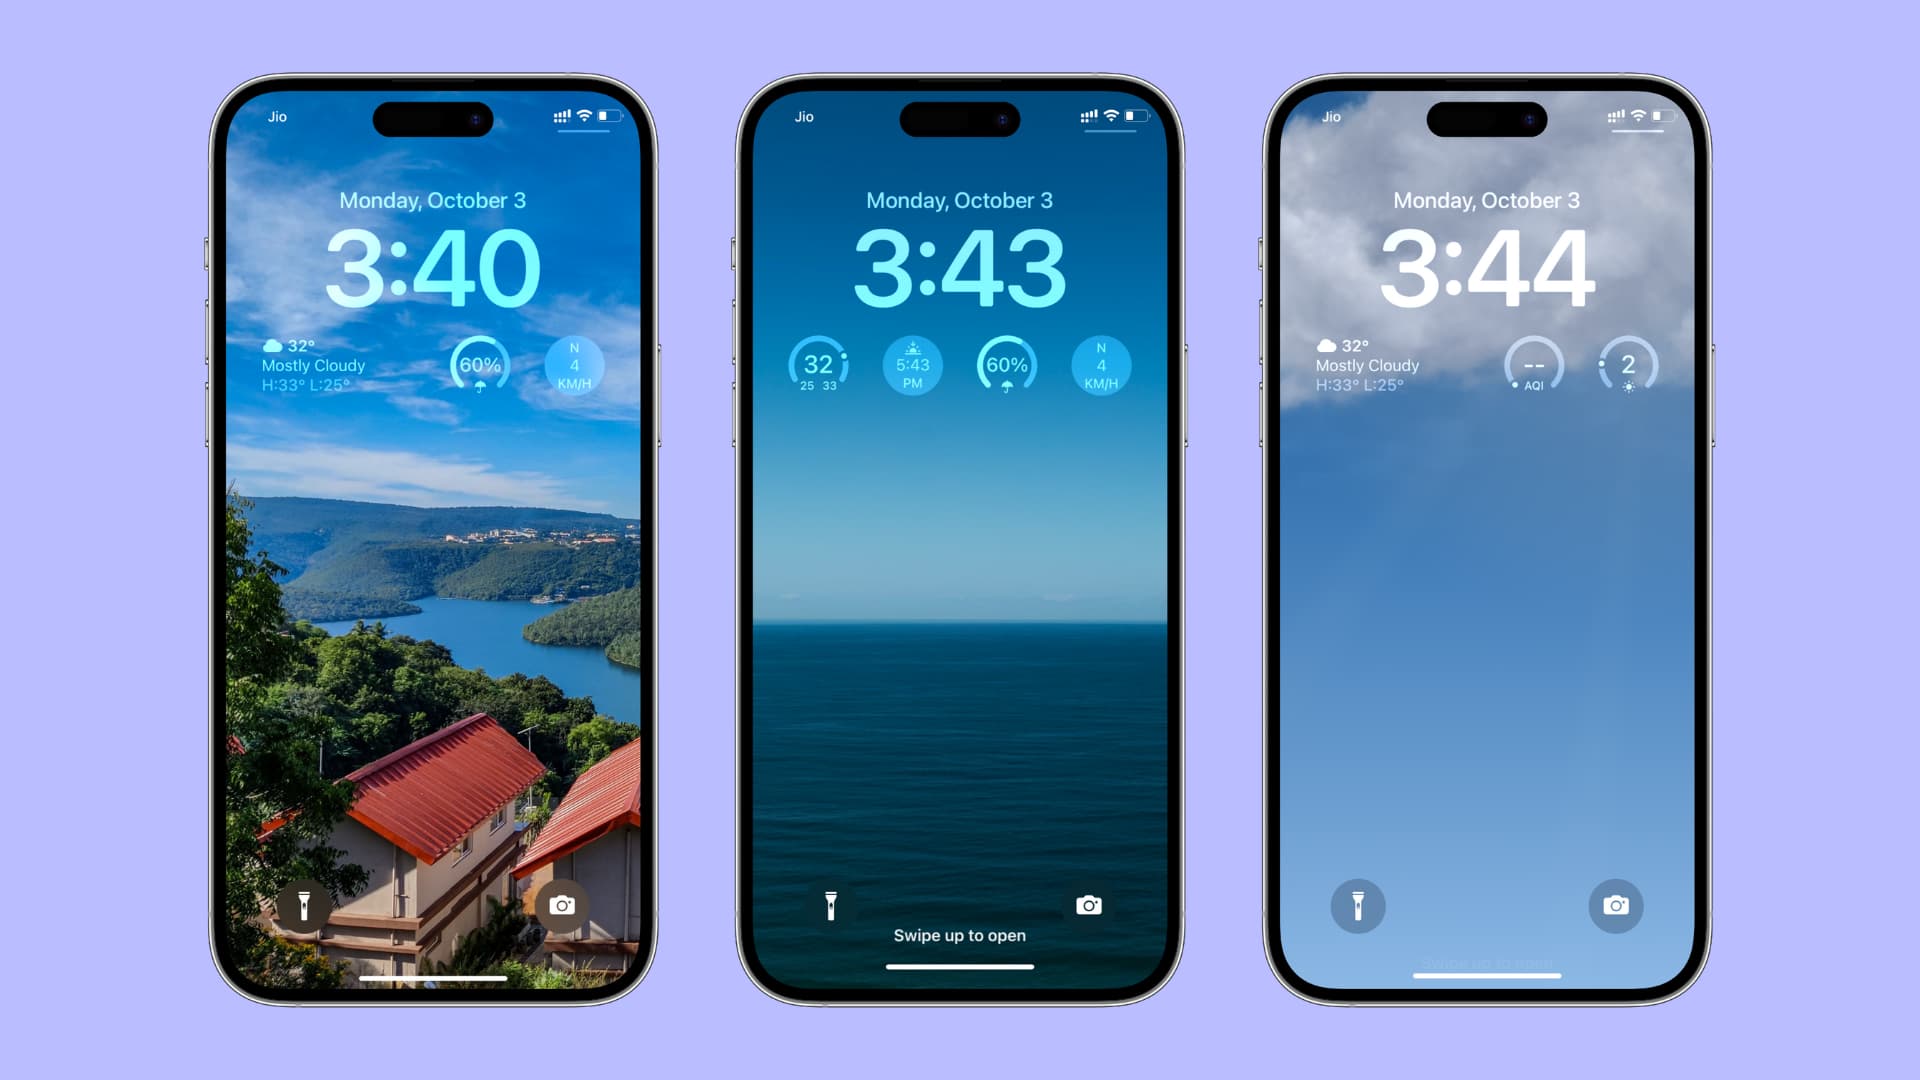 Three iPhone mockups showing weather conditions on the iPhone Lock Screen via weather widgets and smart weather wallpaper